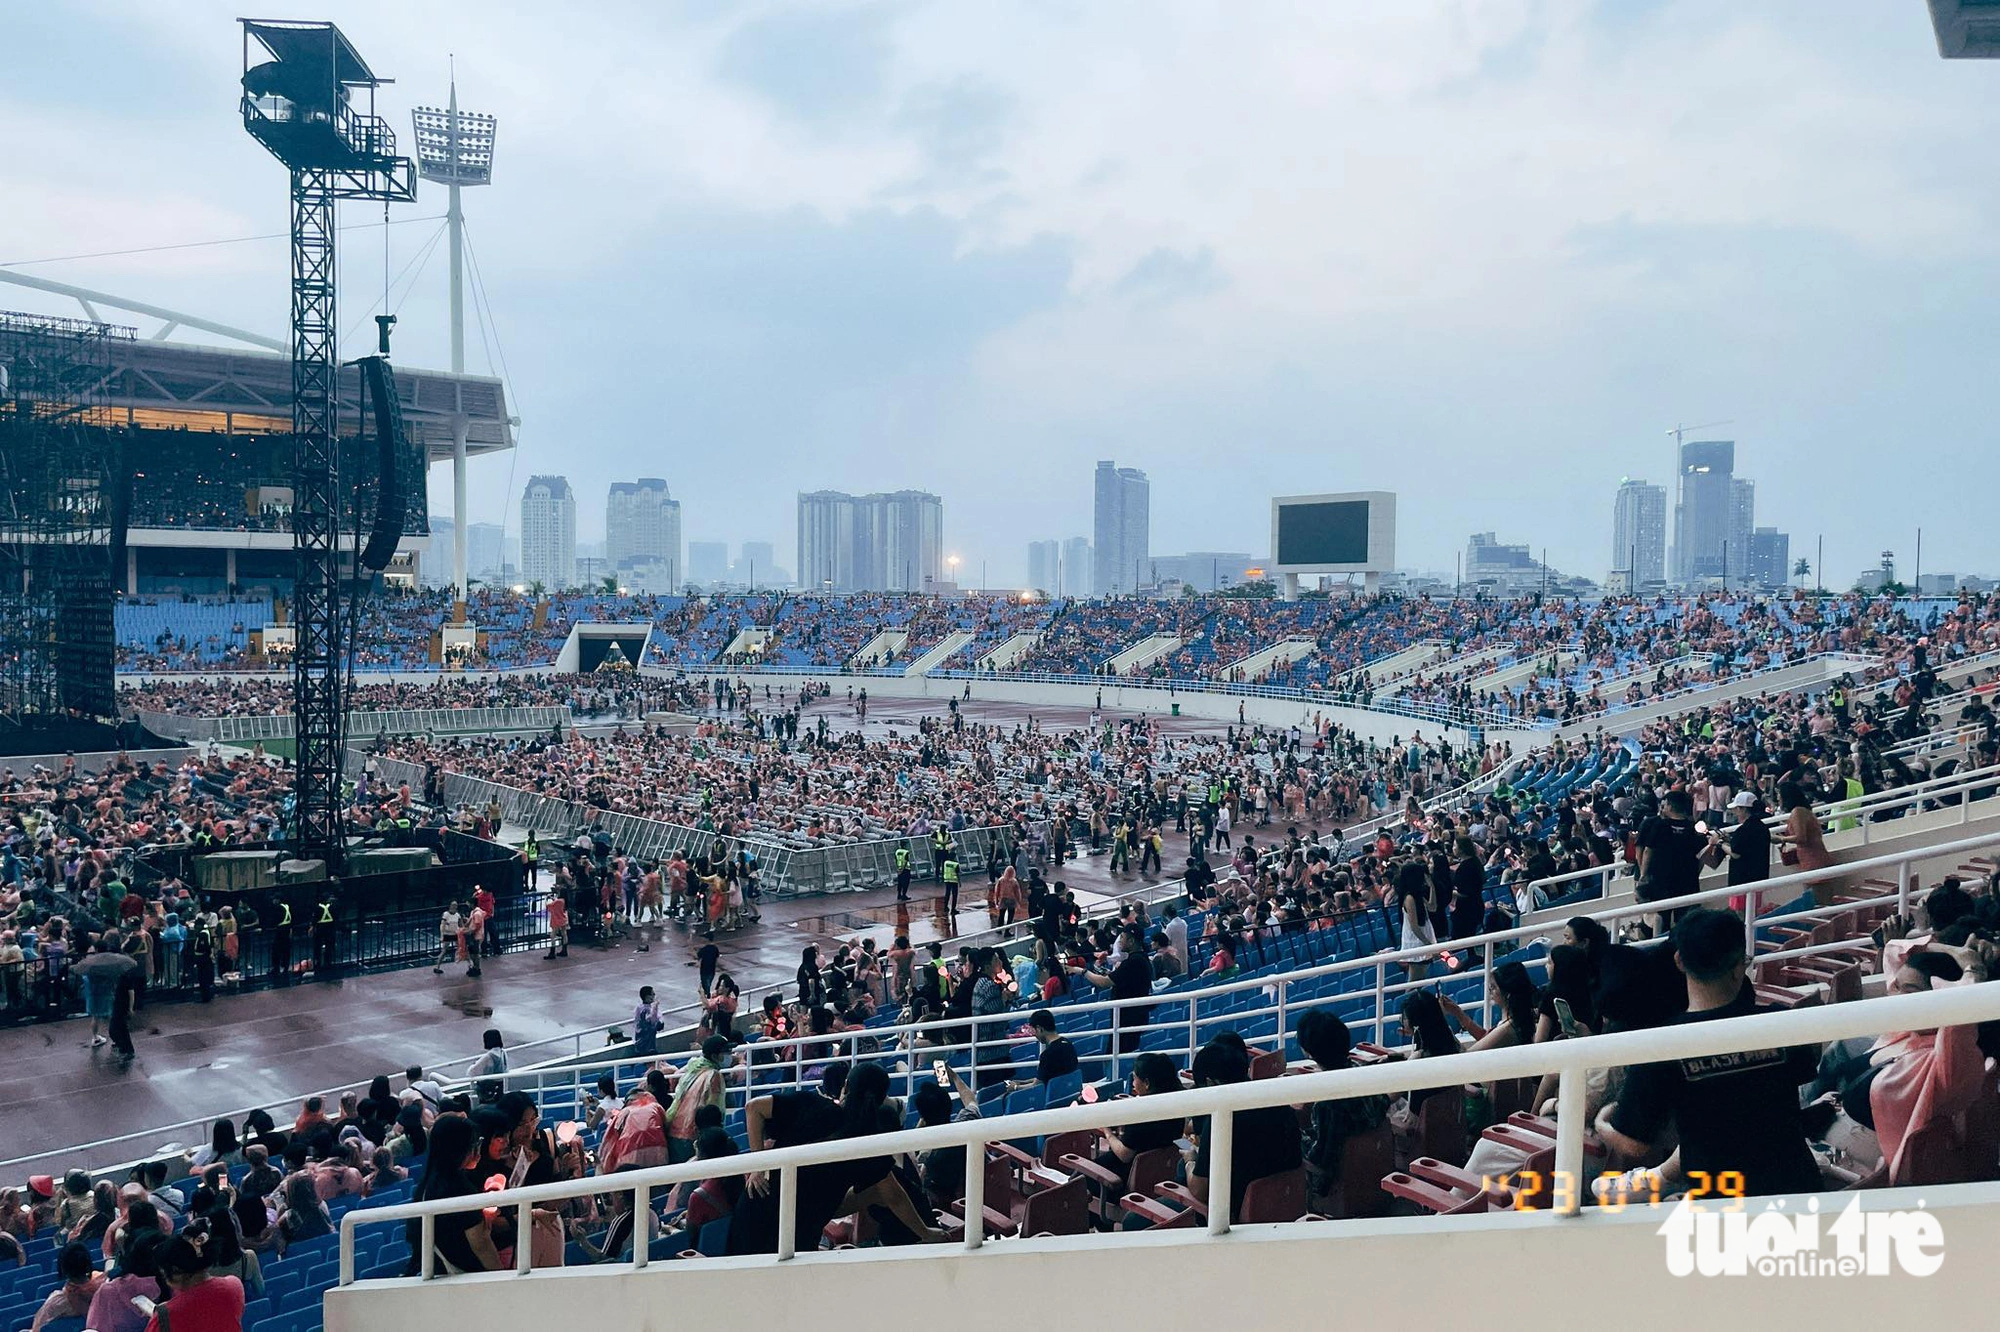 BlackPink concert-goers move to their seats when it is raining. Photo: Mai Thuong / Tuoi Tre